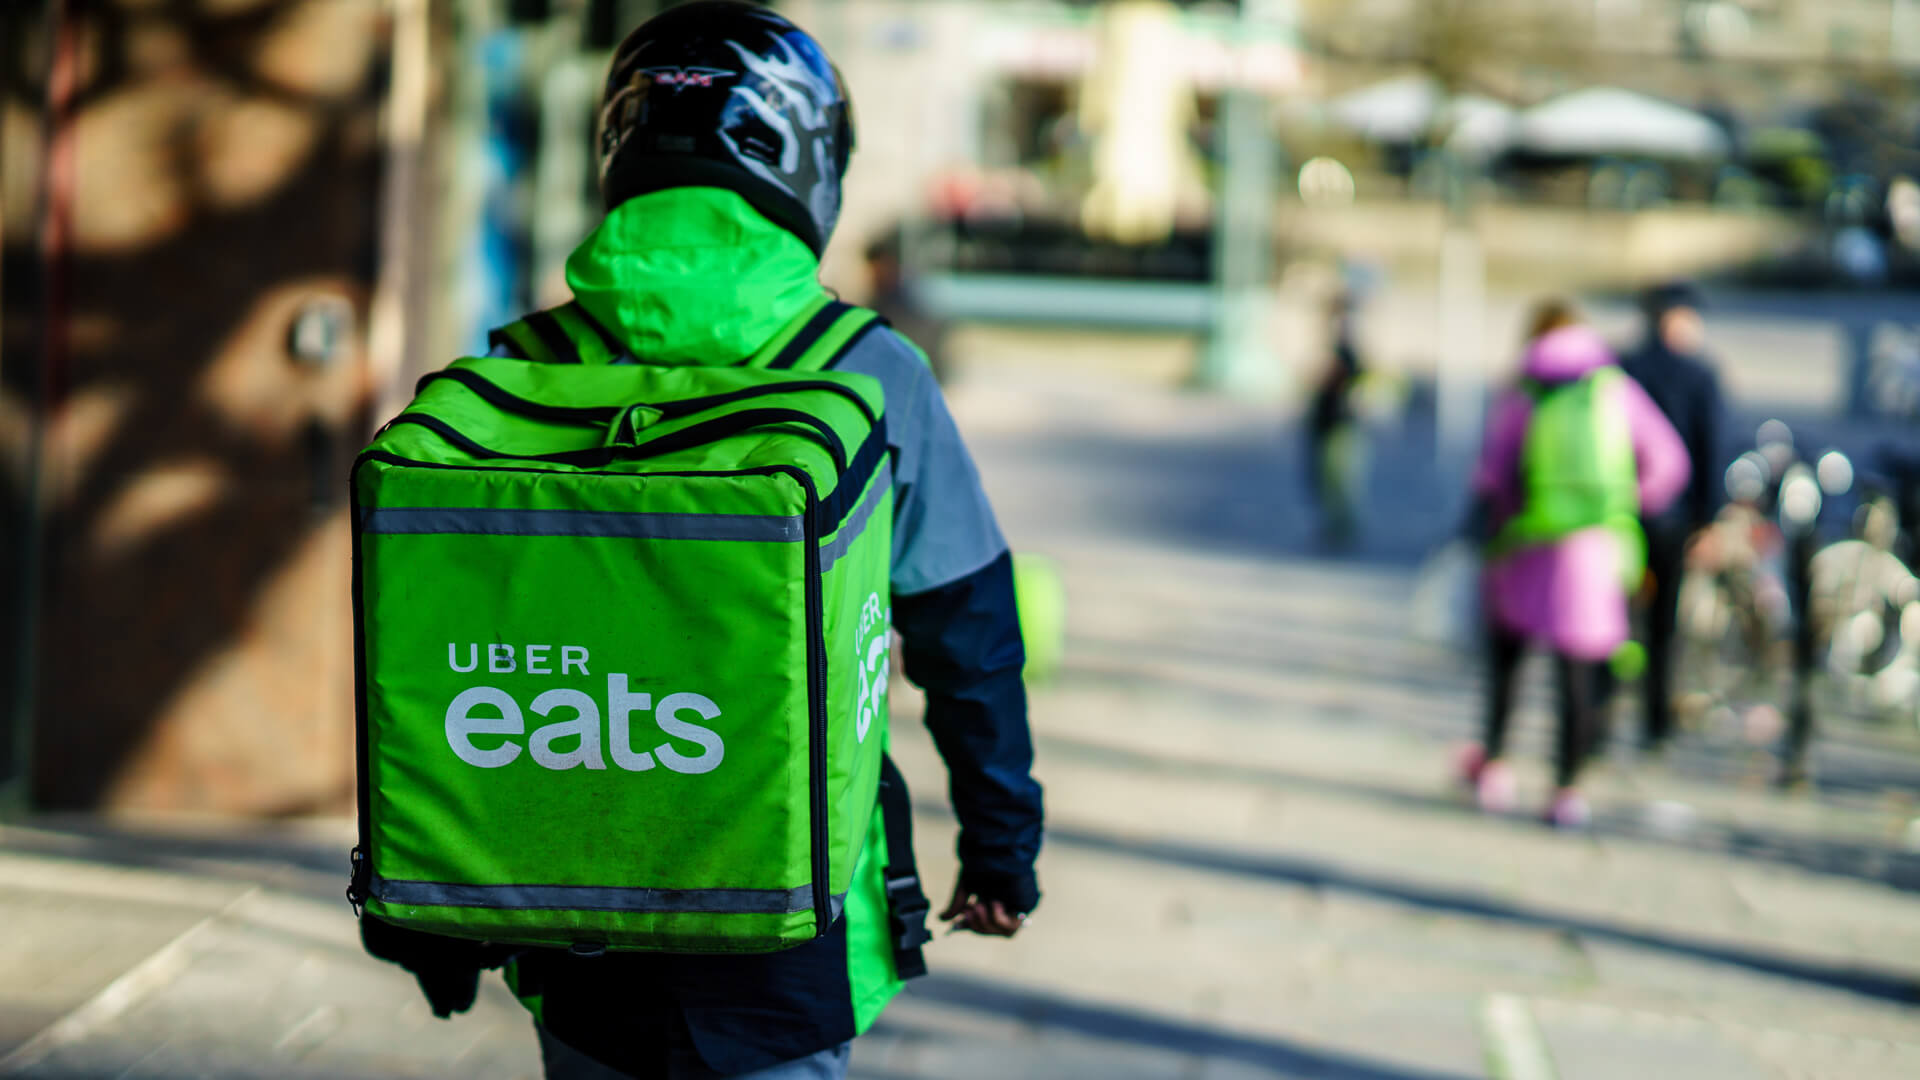 How To Make $1,000 a Week With Uber Eats